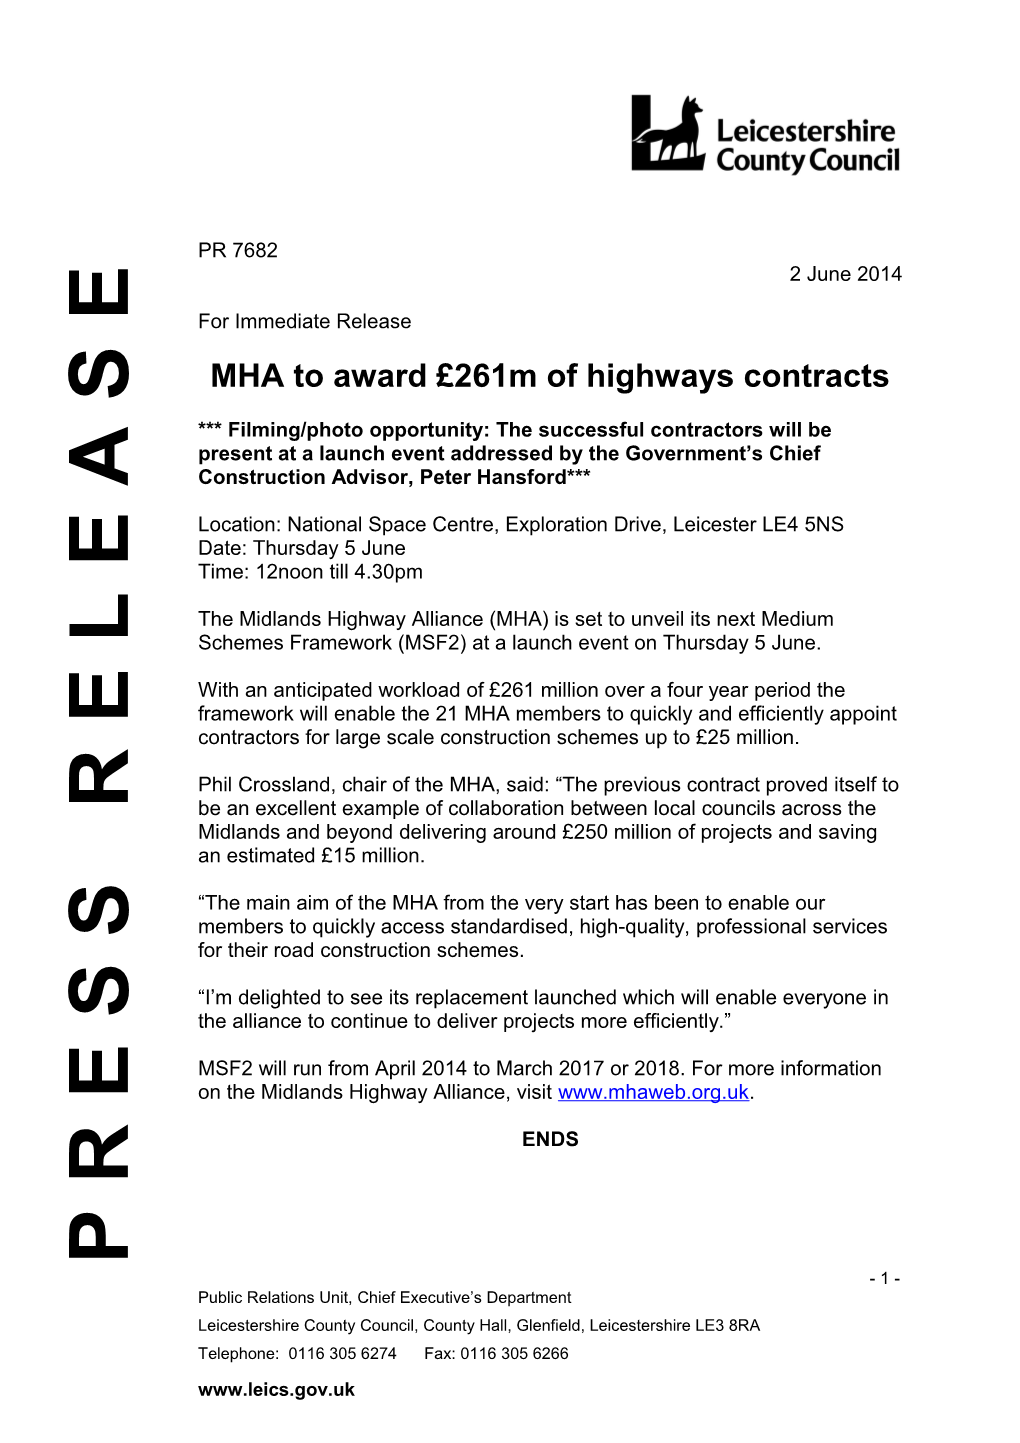 MHA to Award 261M of Highways Contracts